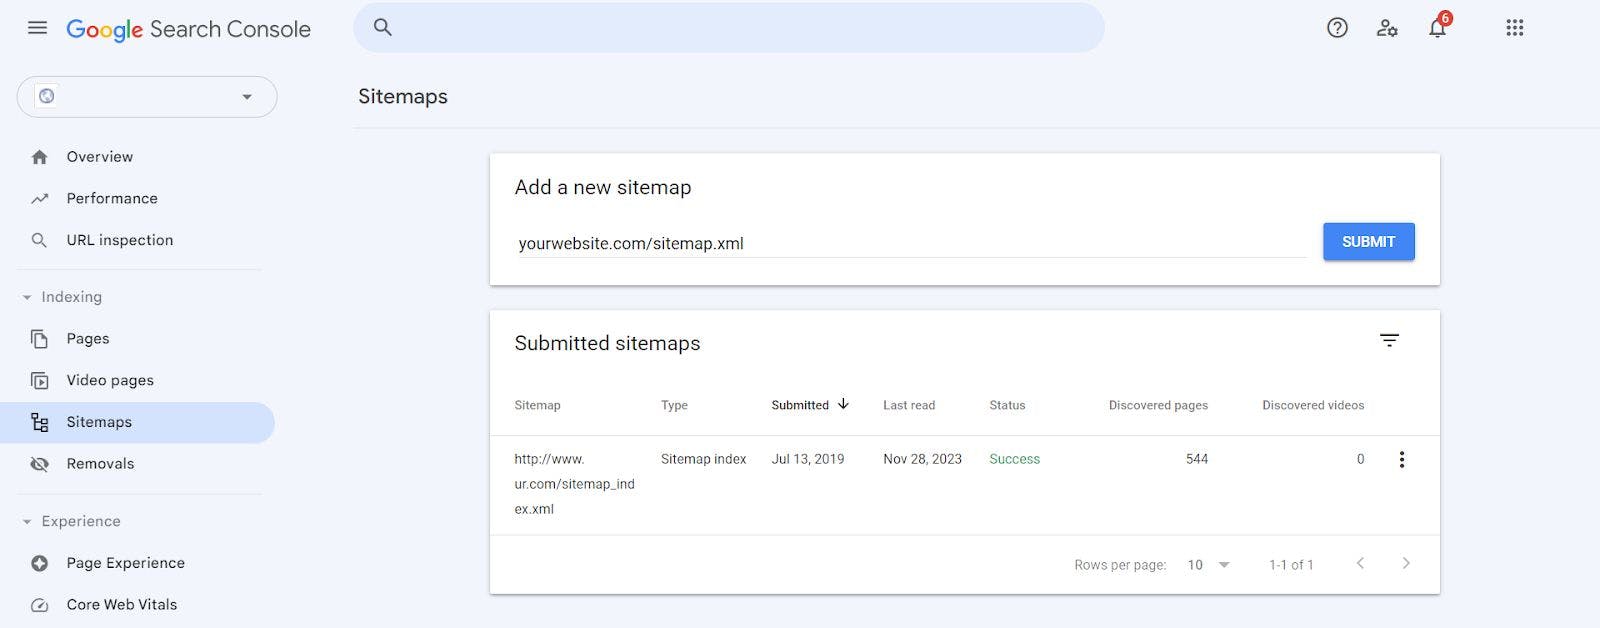 GSC - Sitemap Submission Success Confirmation Screenshot